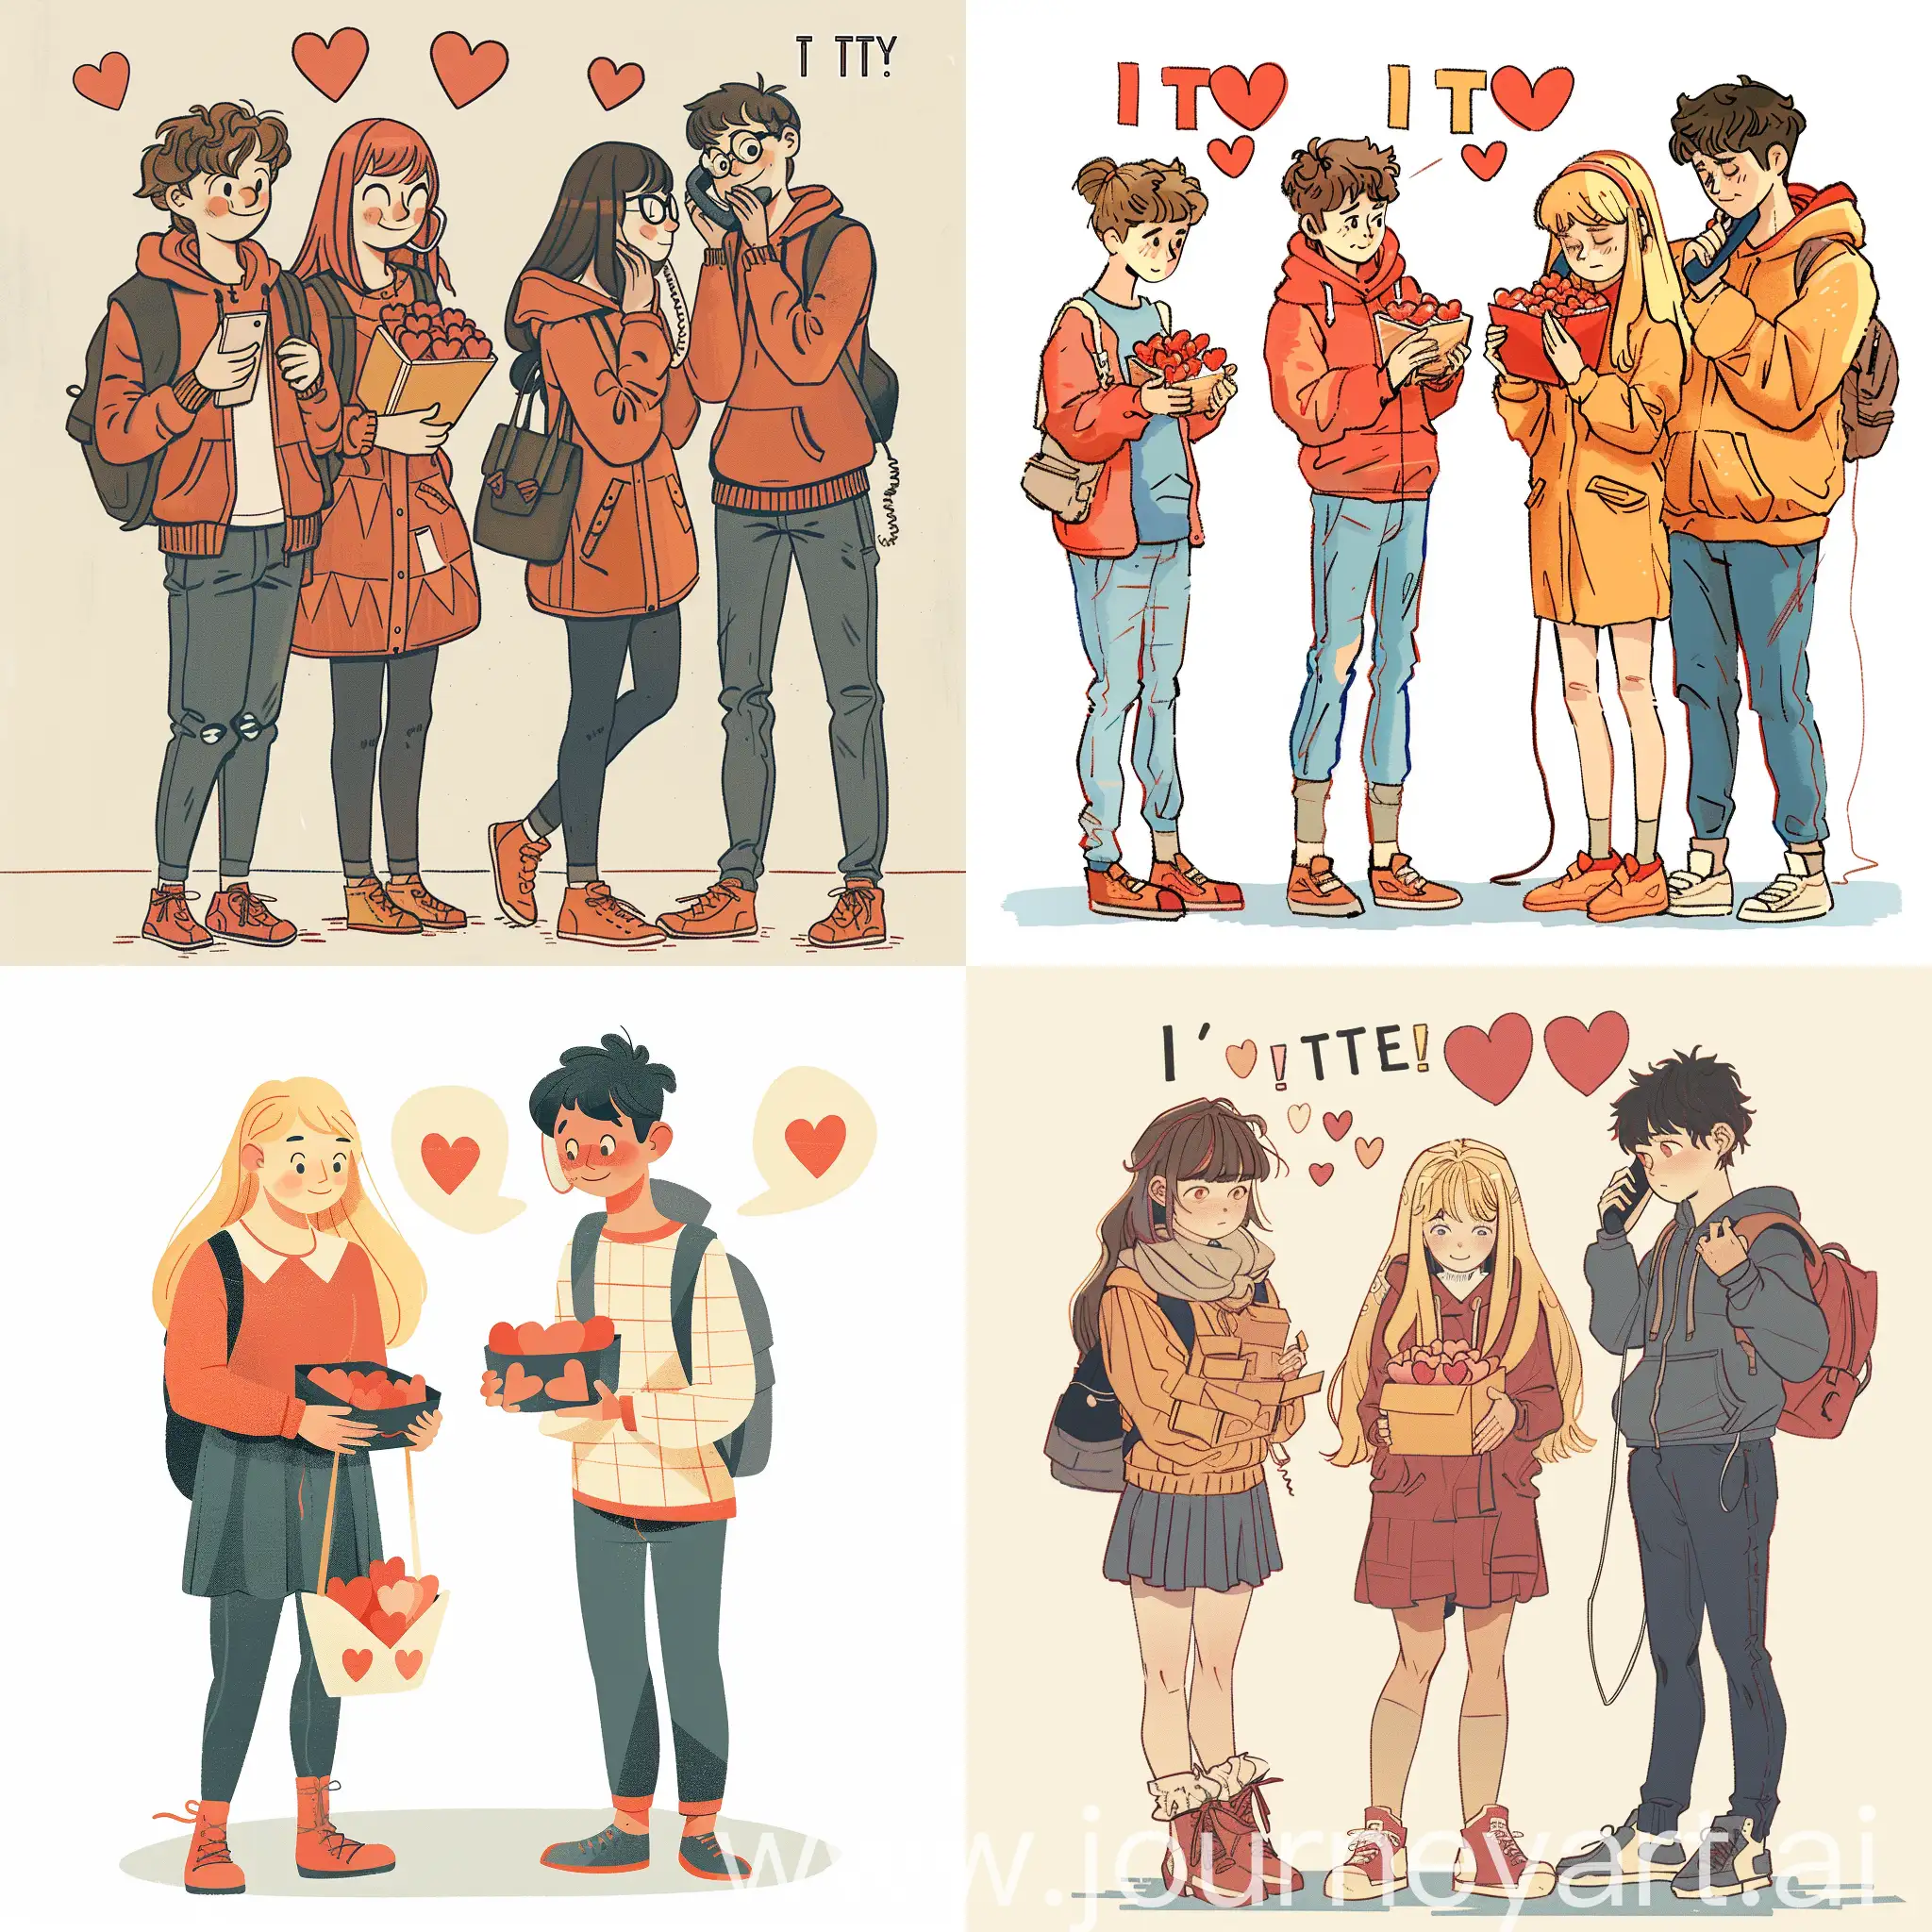 Teenage-Women-and-Men-Holding-Heart-Boxes-Together